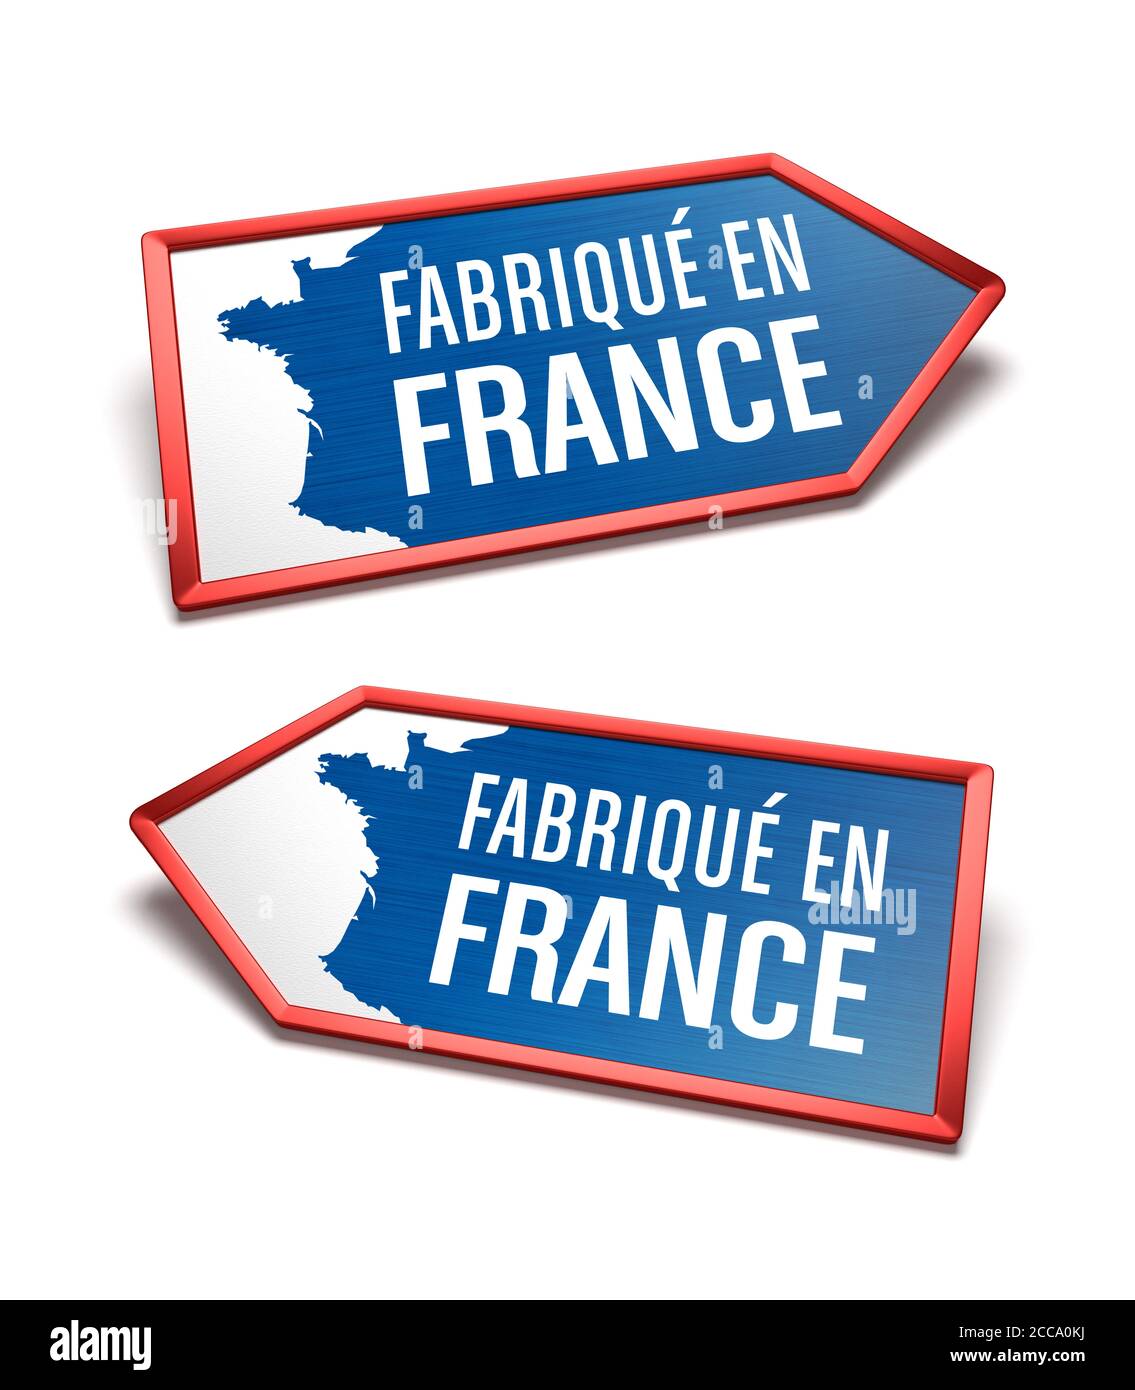 Made in France - Blue, white and blue labels with a map of France, text in French language. French certificate inside arrow icon shapes, pointing left Stock Photo